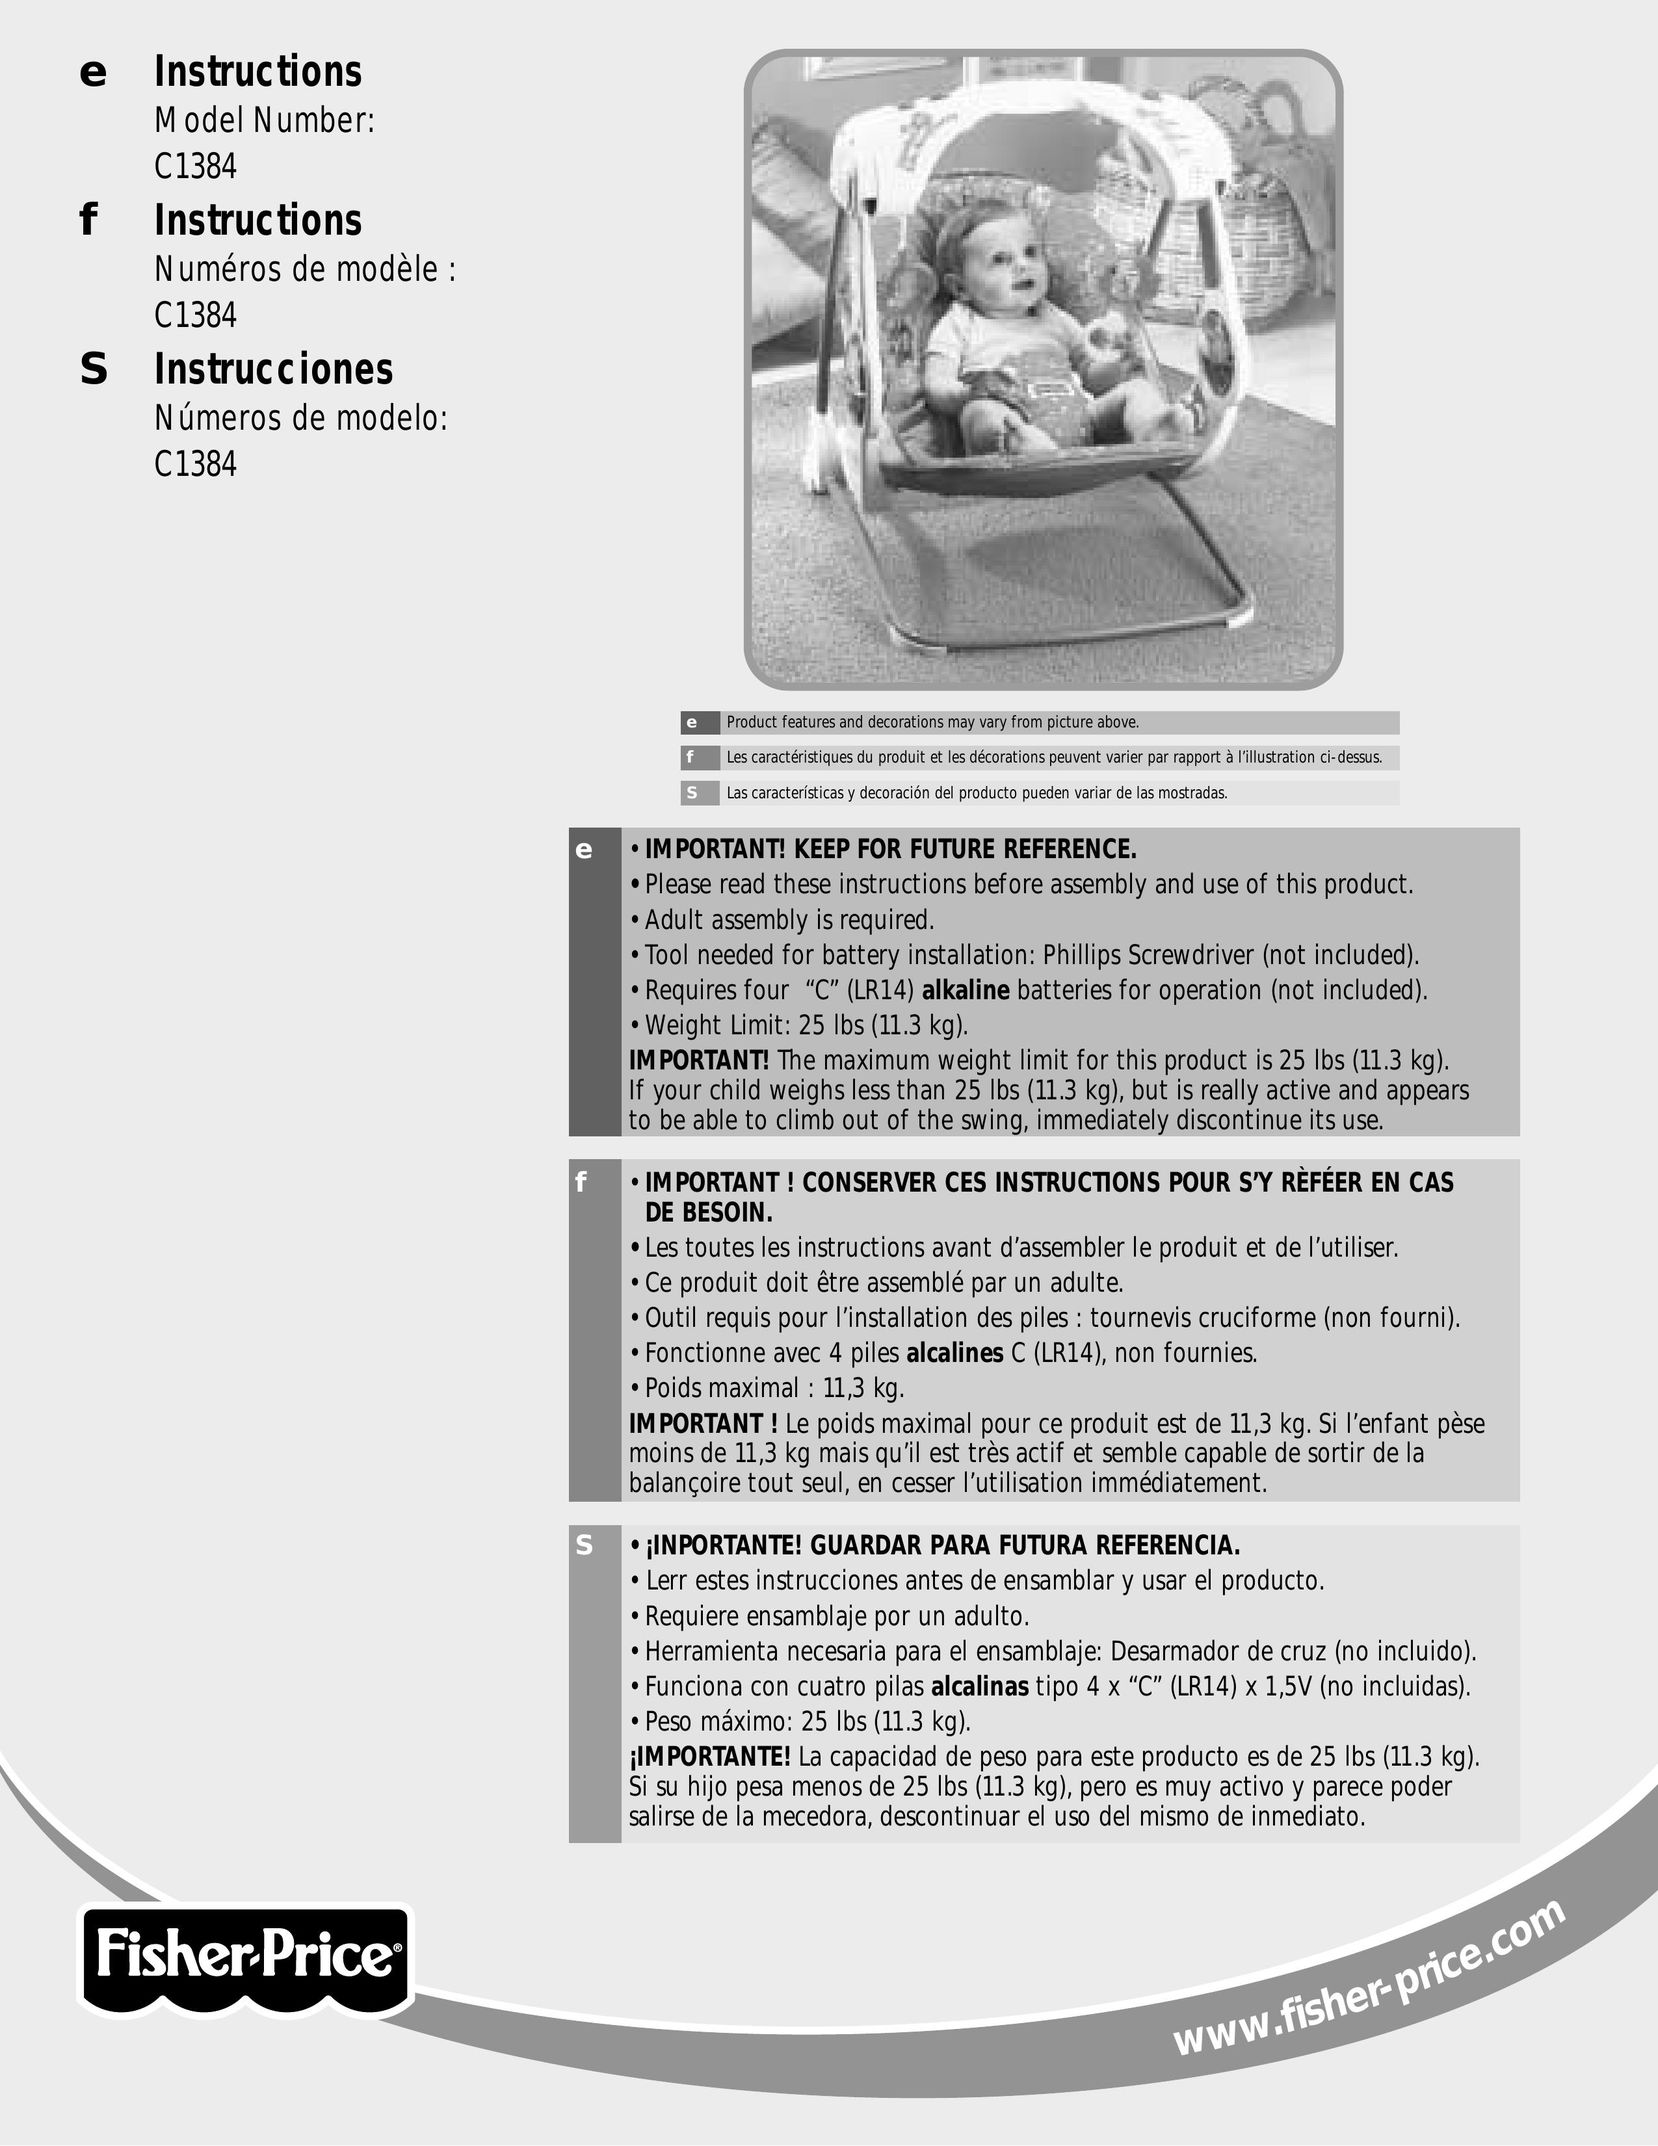 Fisher-Price C1384 Bouncy Seat User Manual